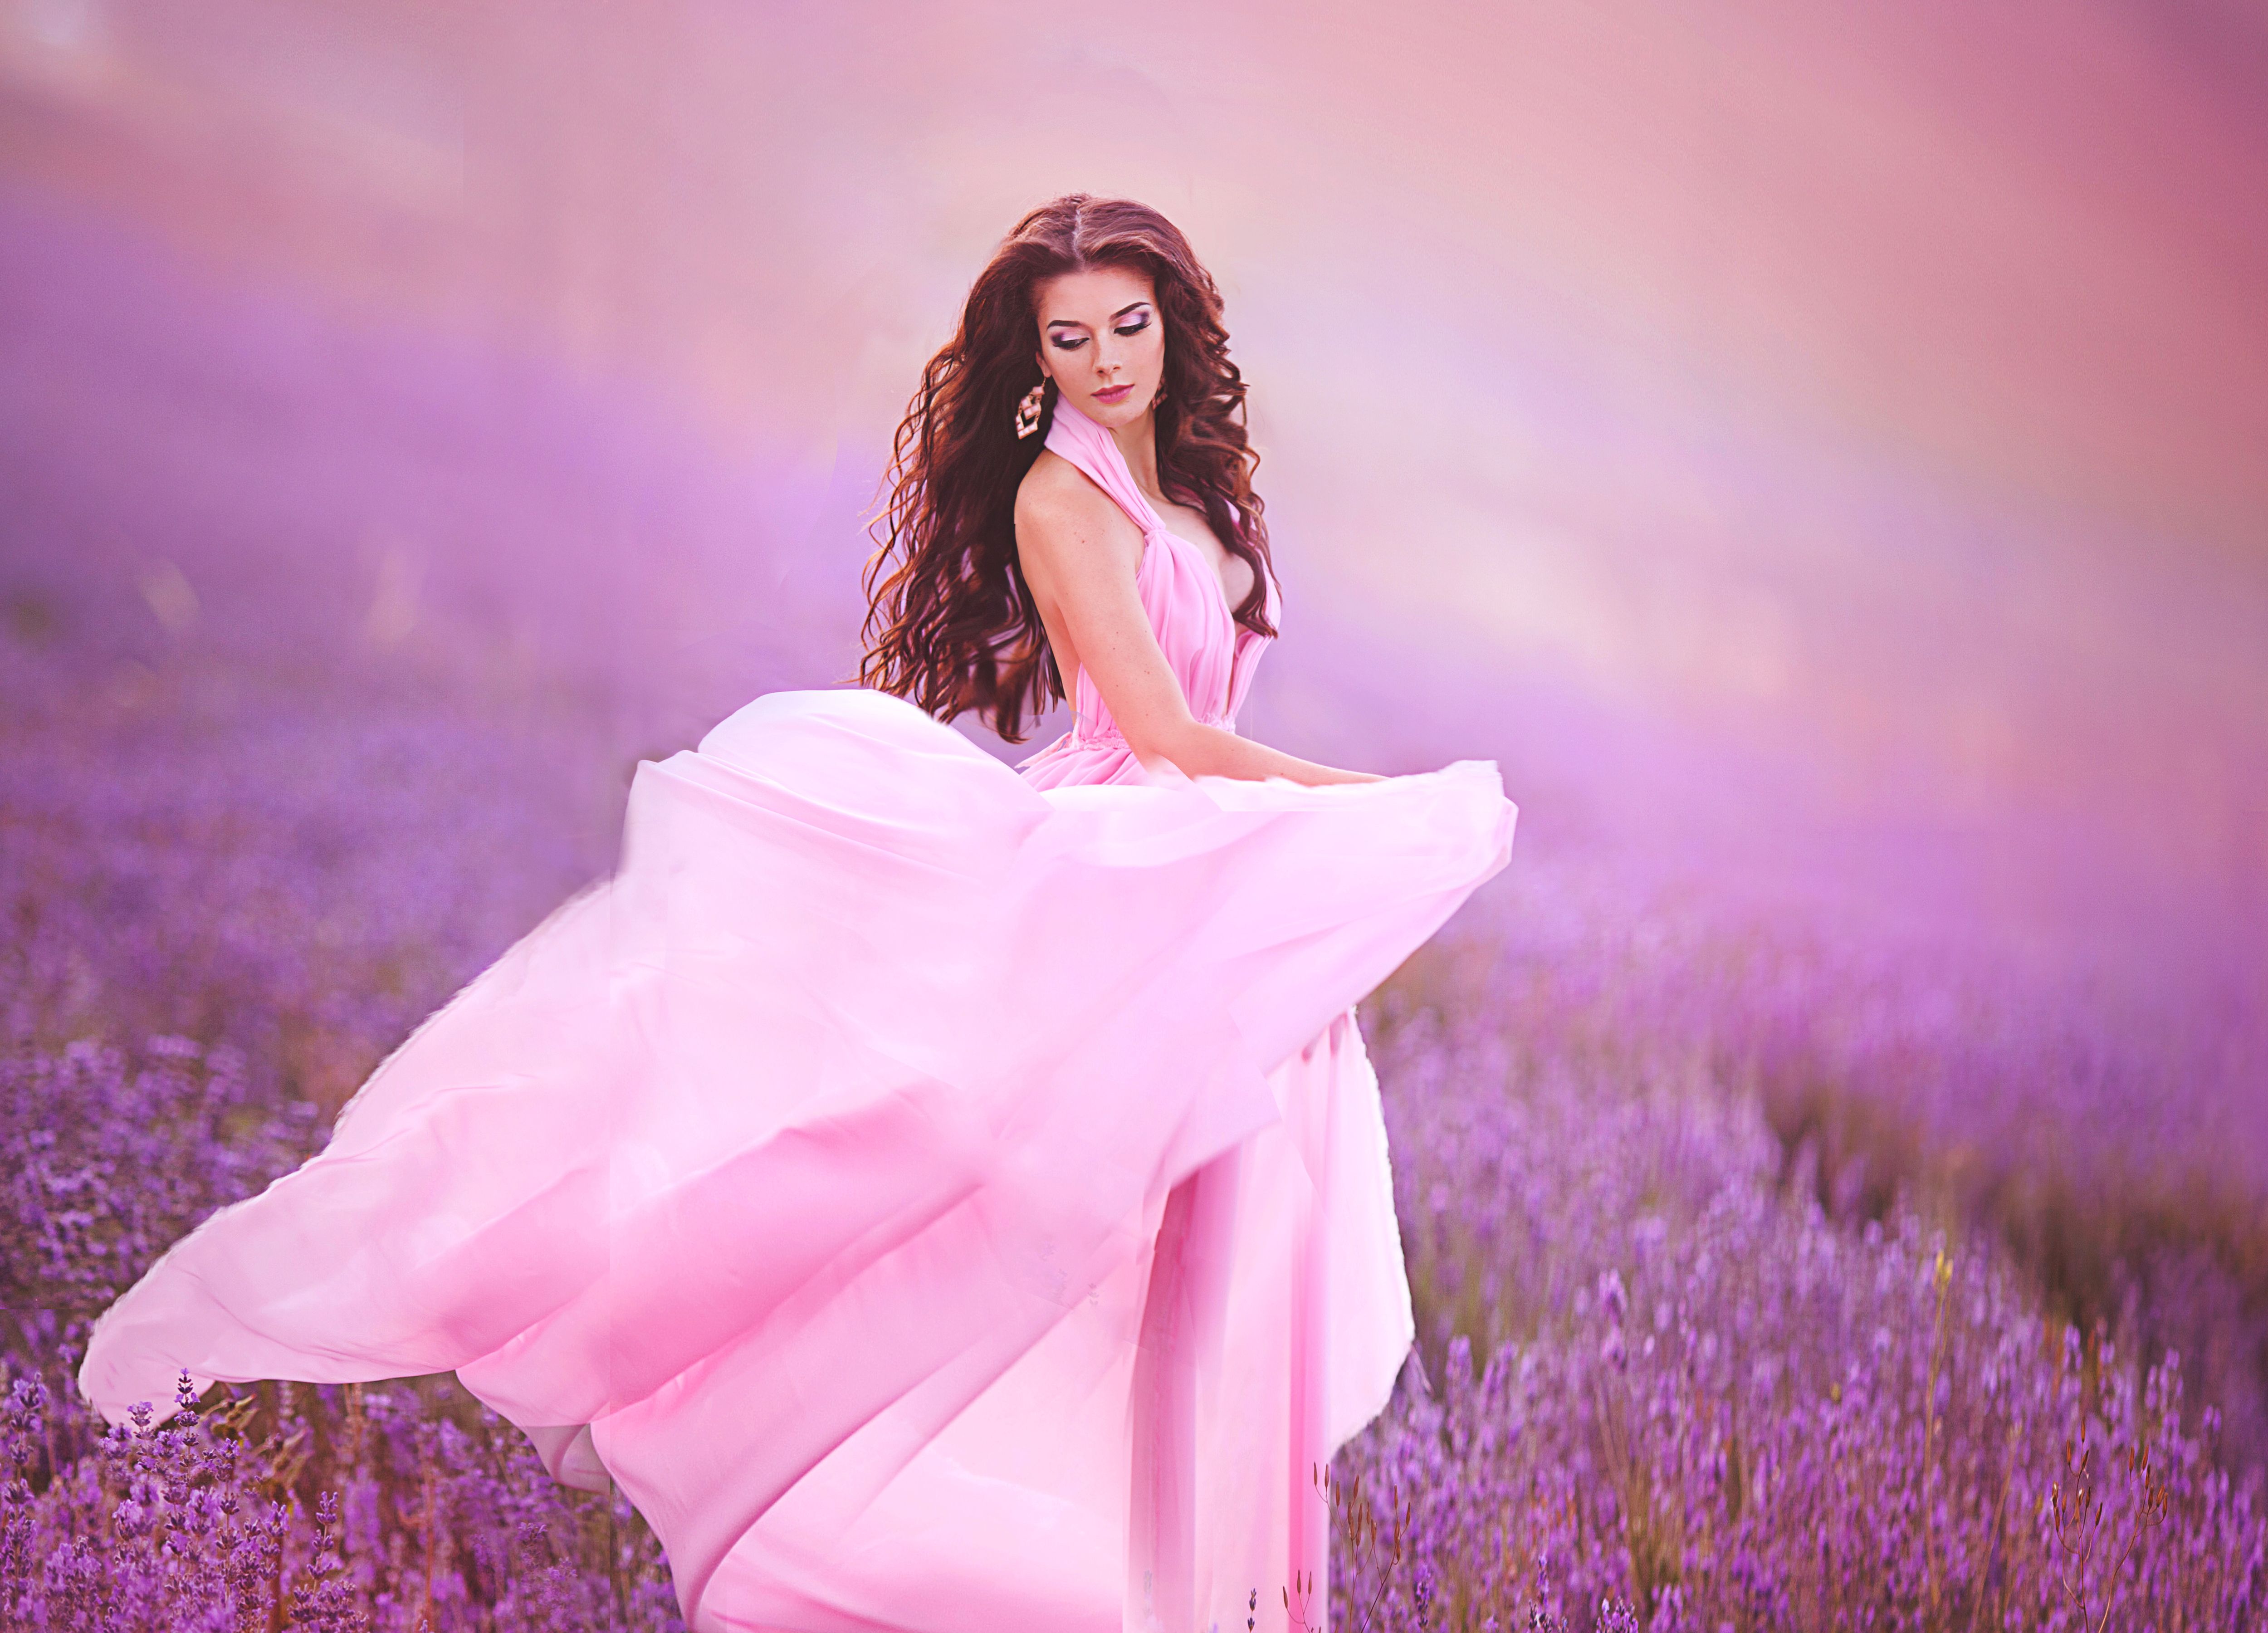 Girl with Pink Gown in Lavender Field 4k Ultra HD Wallpaper